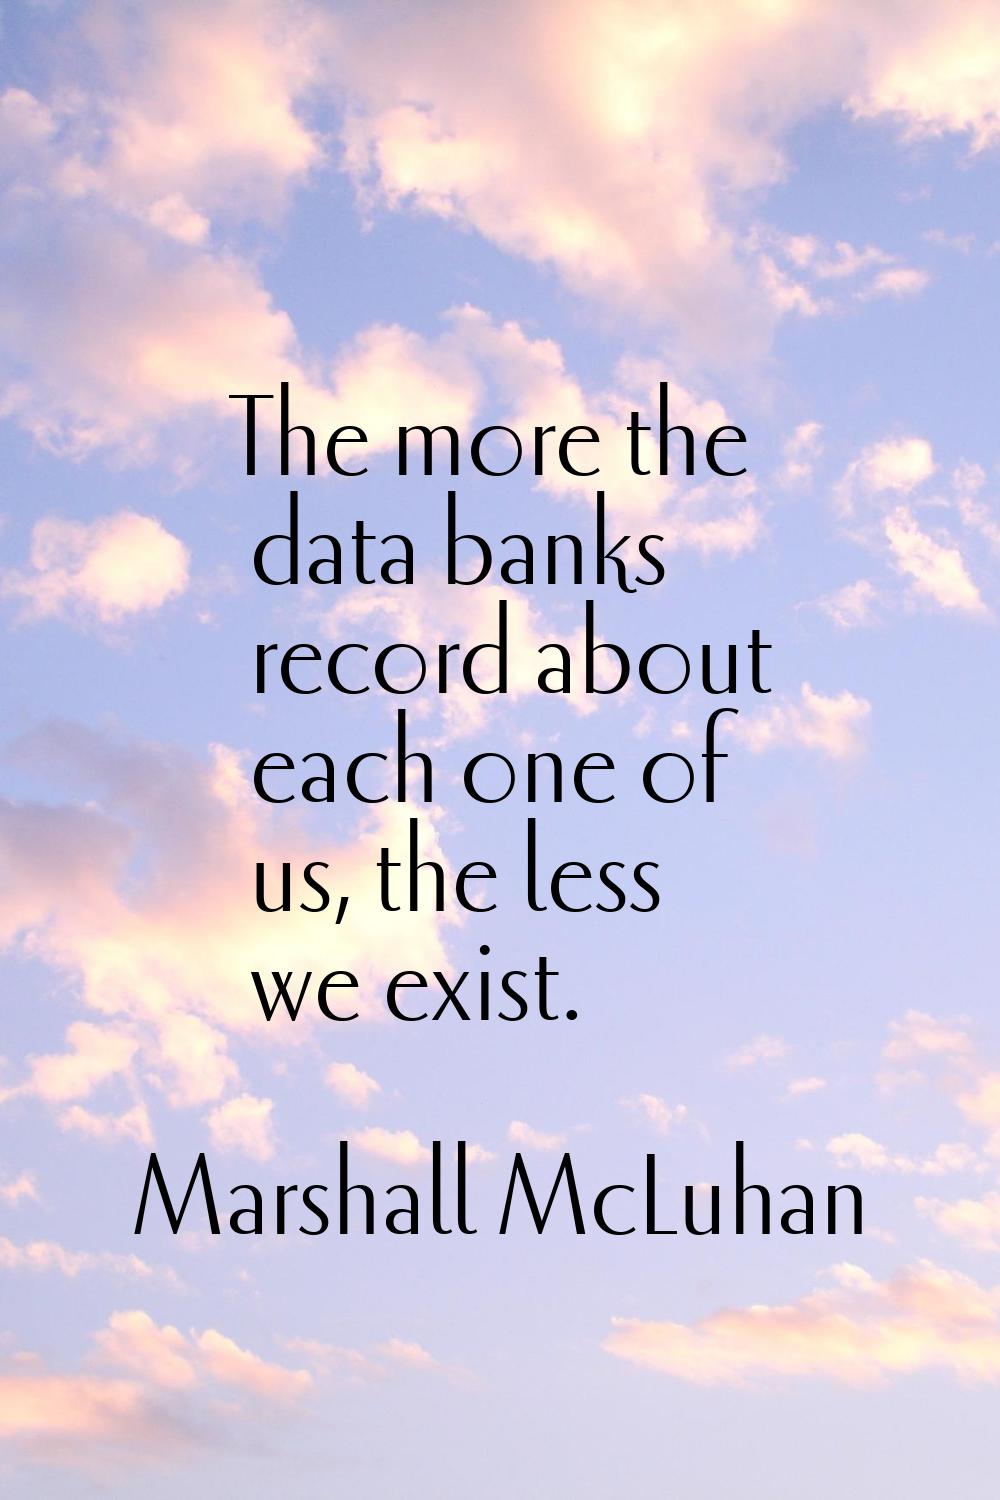 The more the data banks record about each one of us, the less we exist.